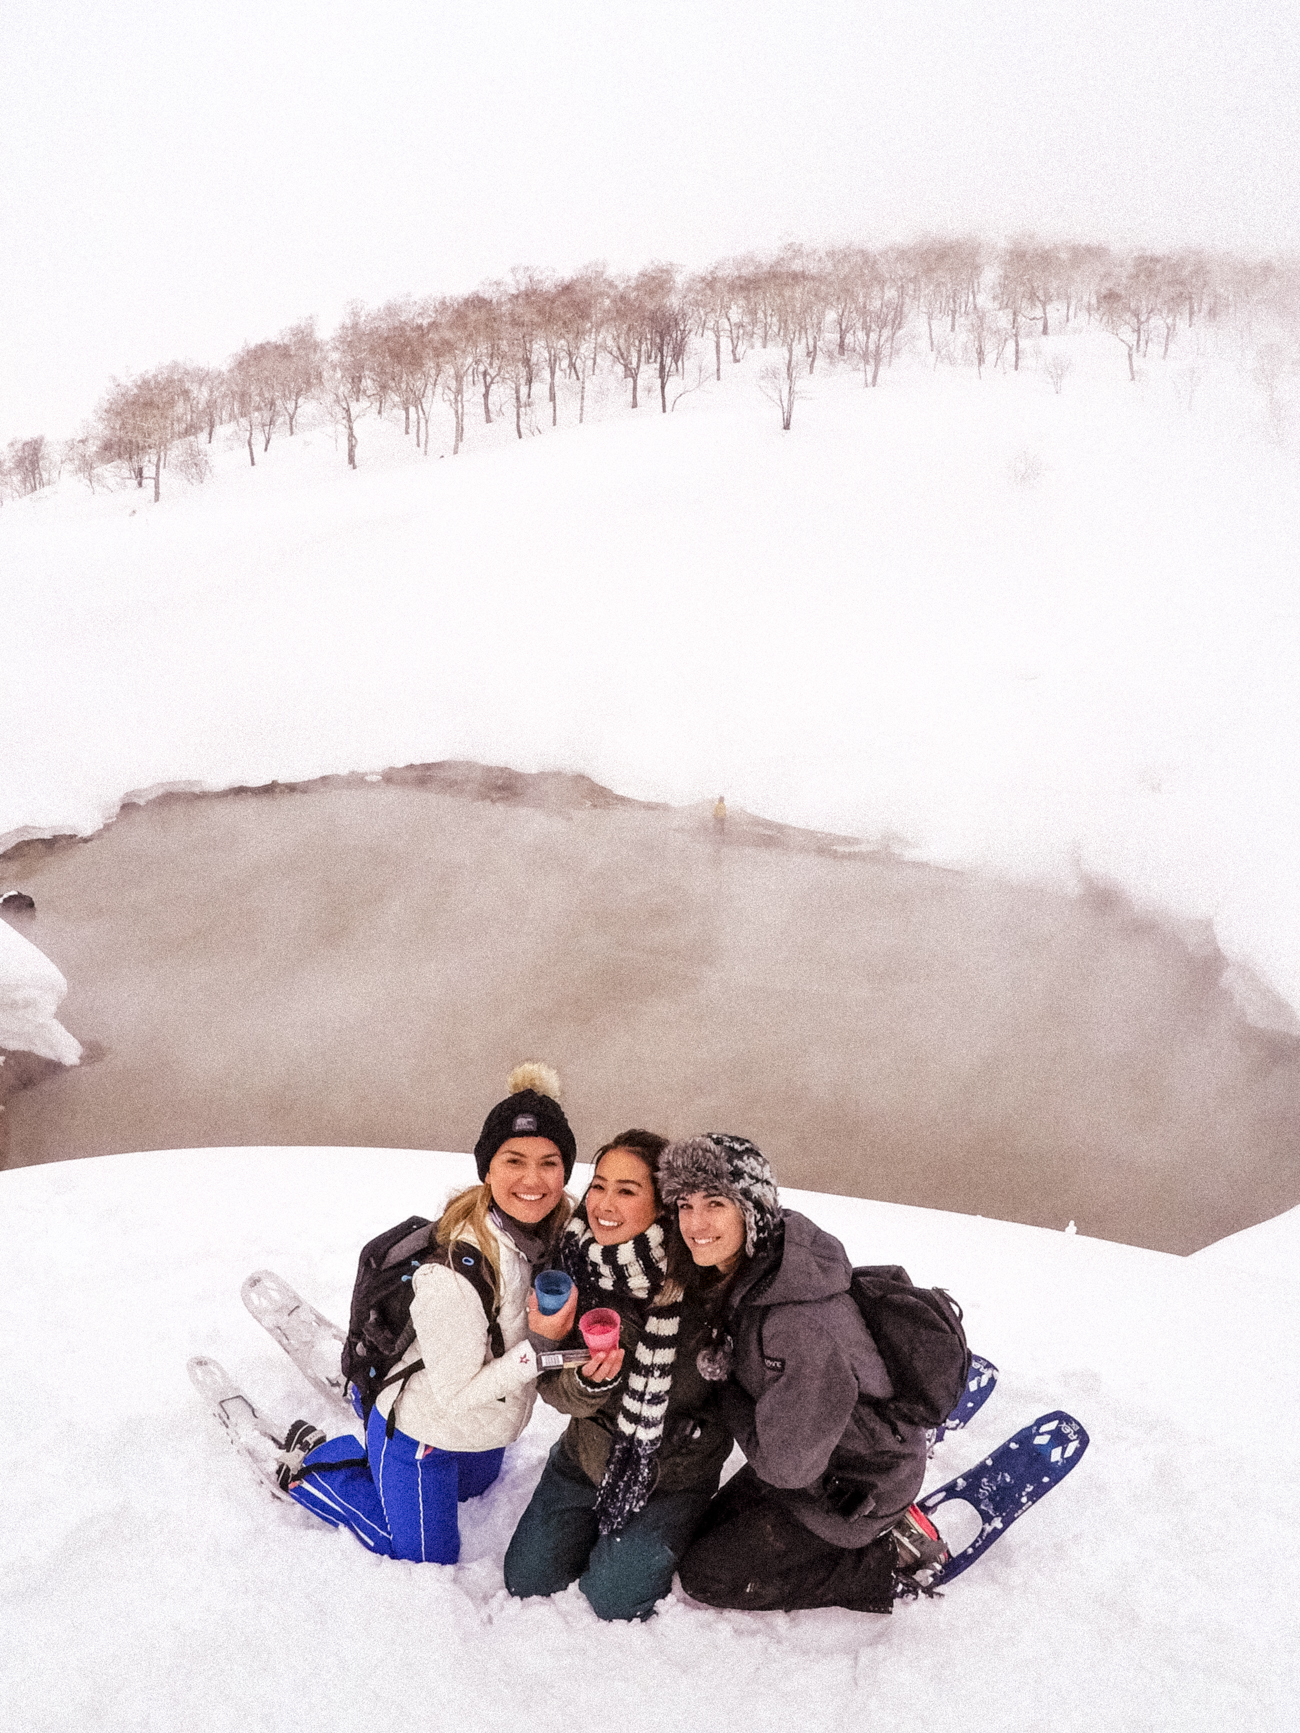 Niseko, Japan: A complete travel guide. Where's Mollie?